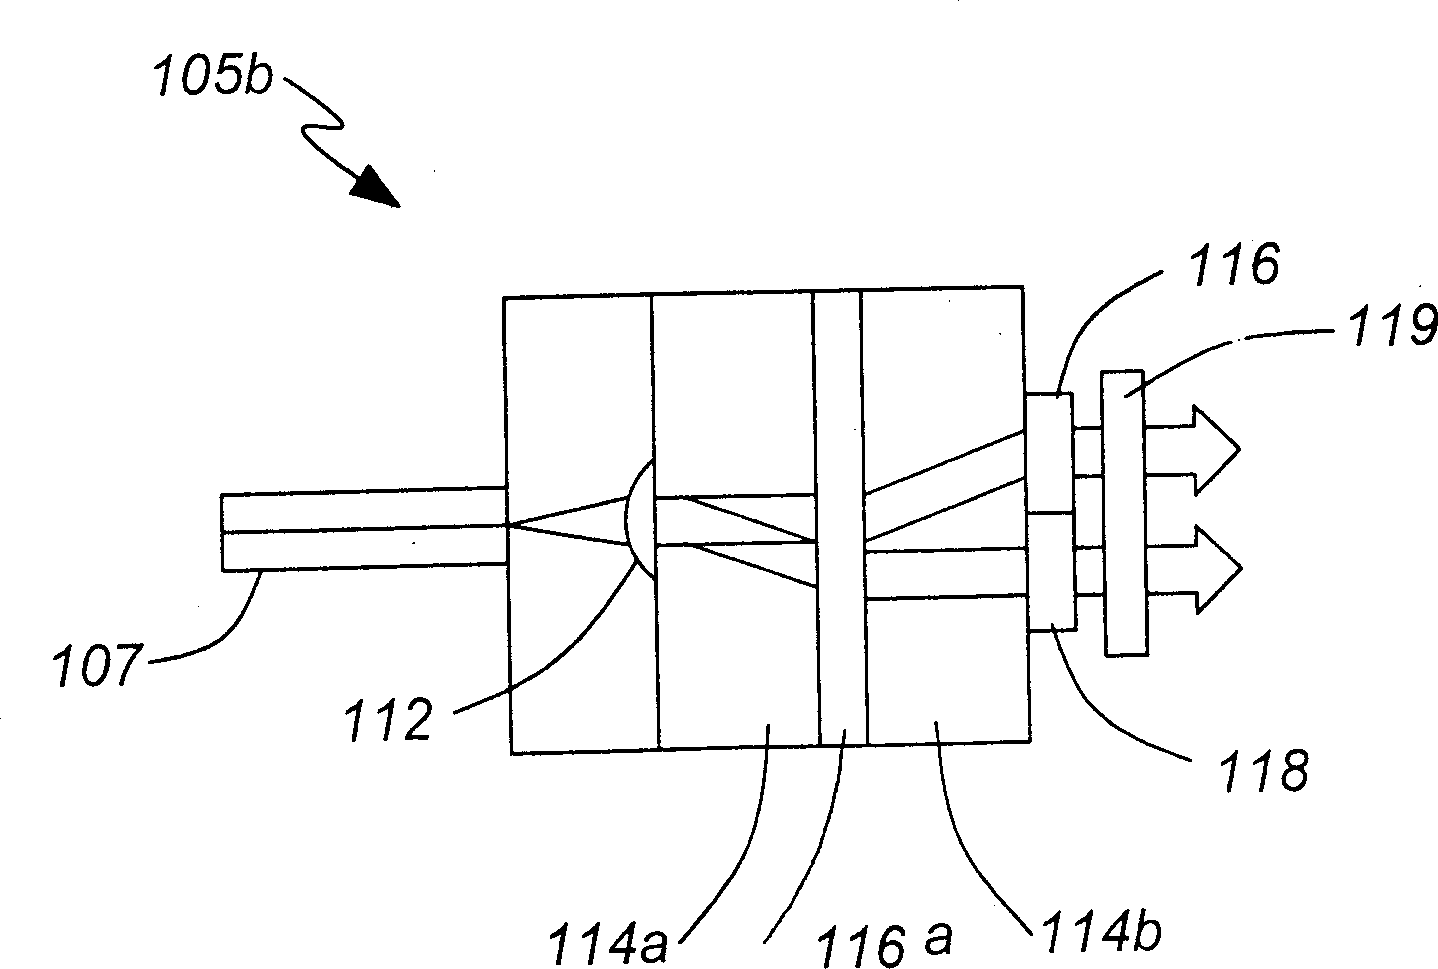 Optical allocation for dynamic gain balancer and adder-subtractor